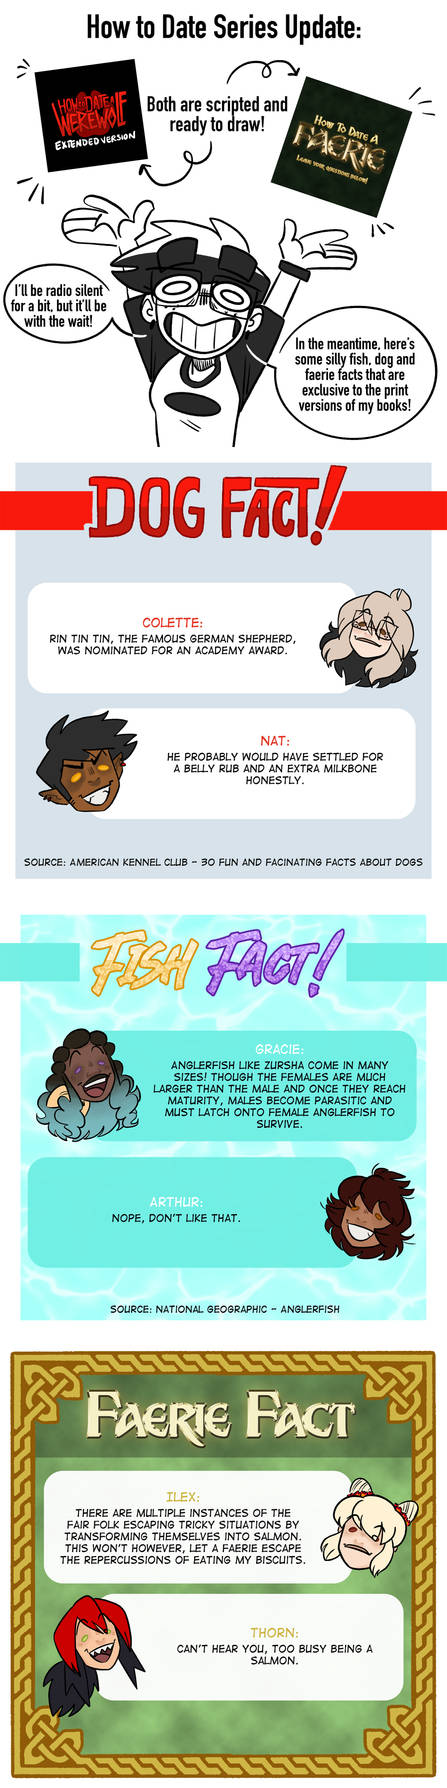 FACT CHECK by shelbyecandraw on DeviantArt